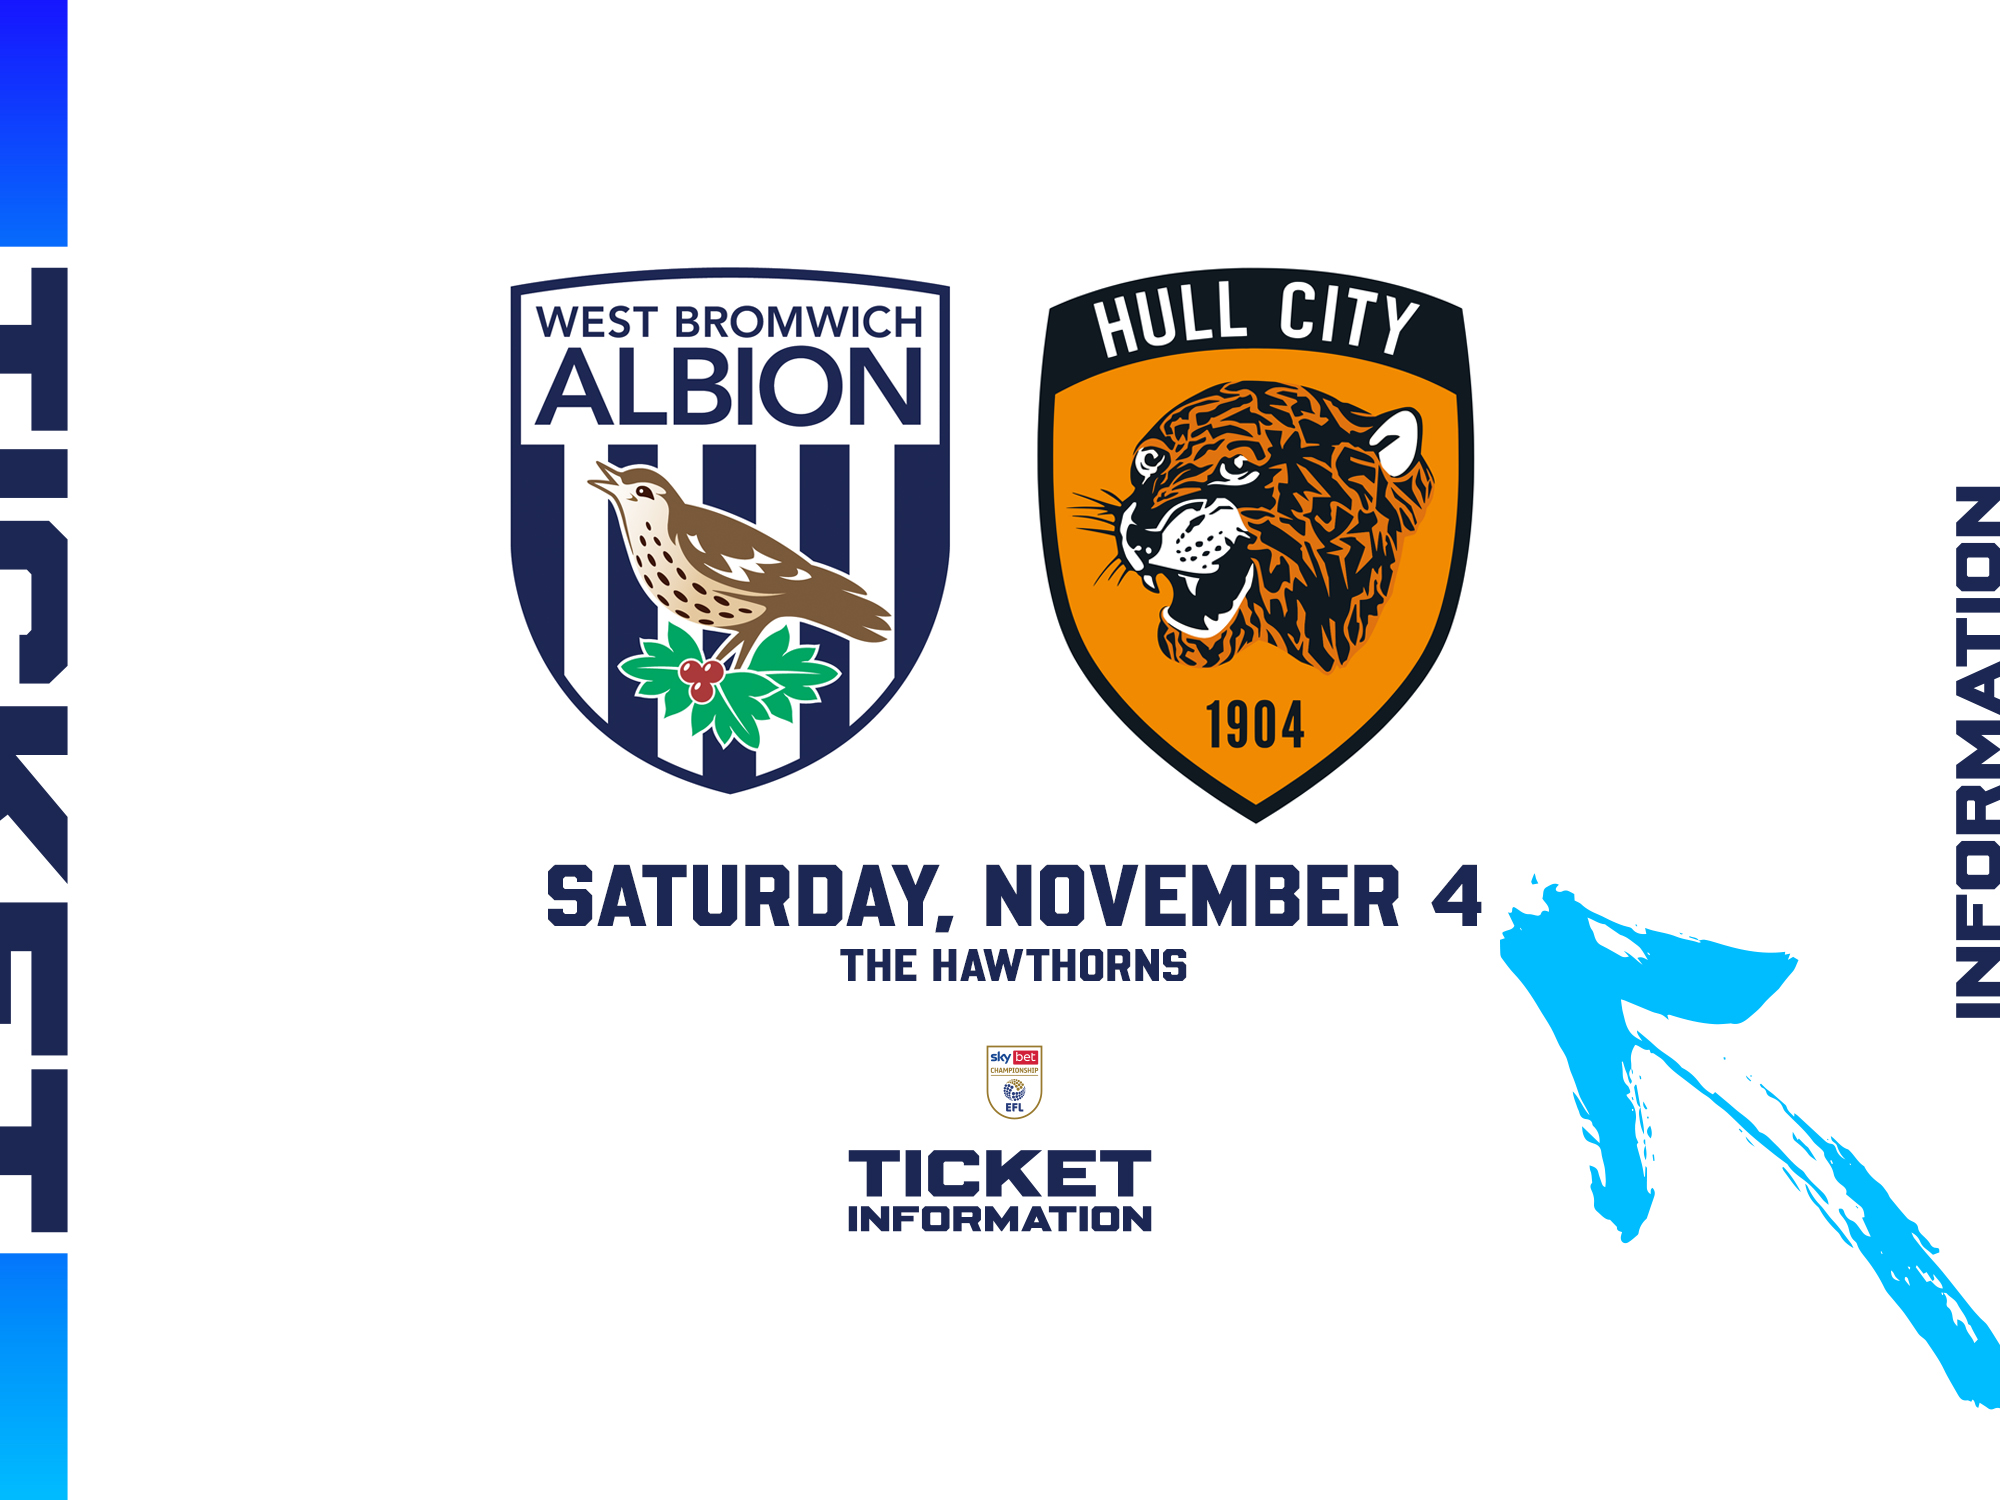 A ticket graphic displaying information for Albion's game against Hull